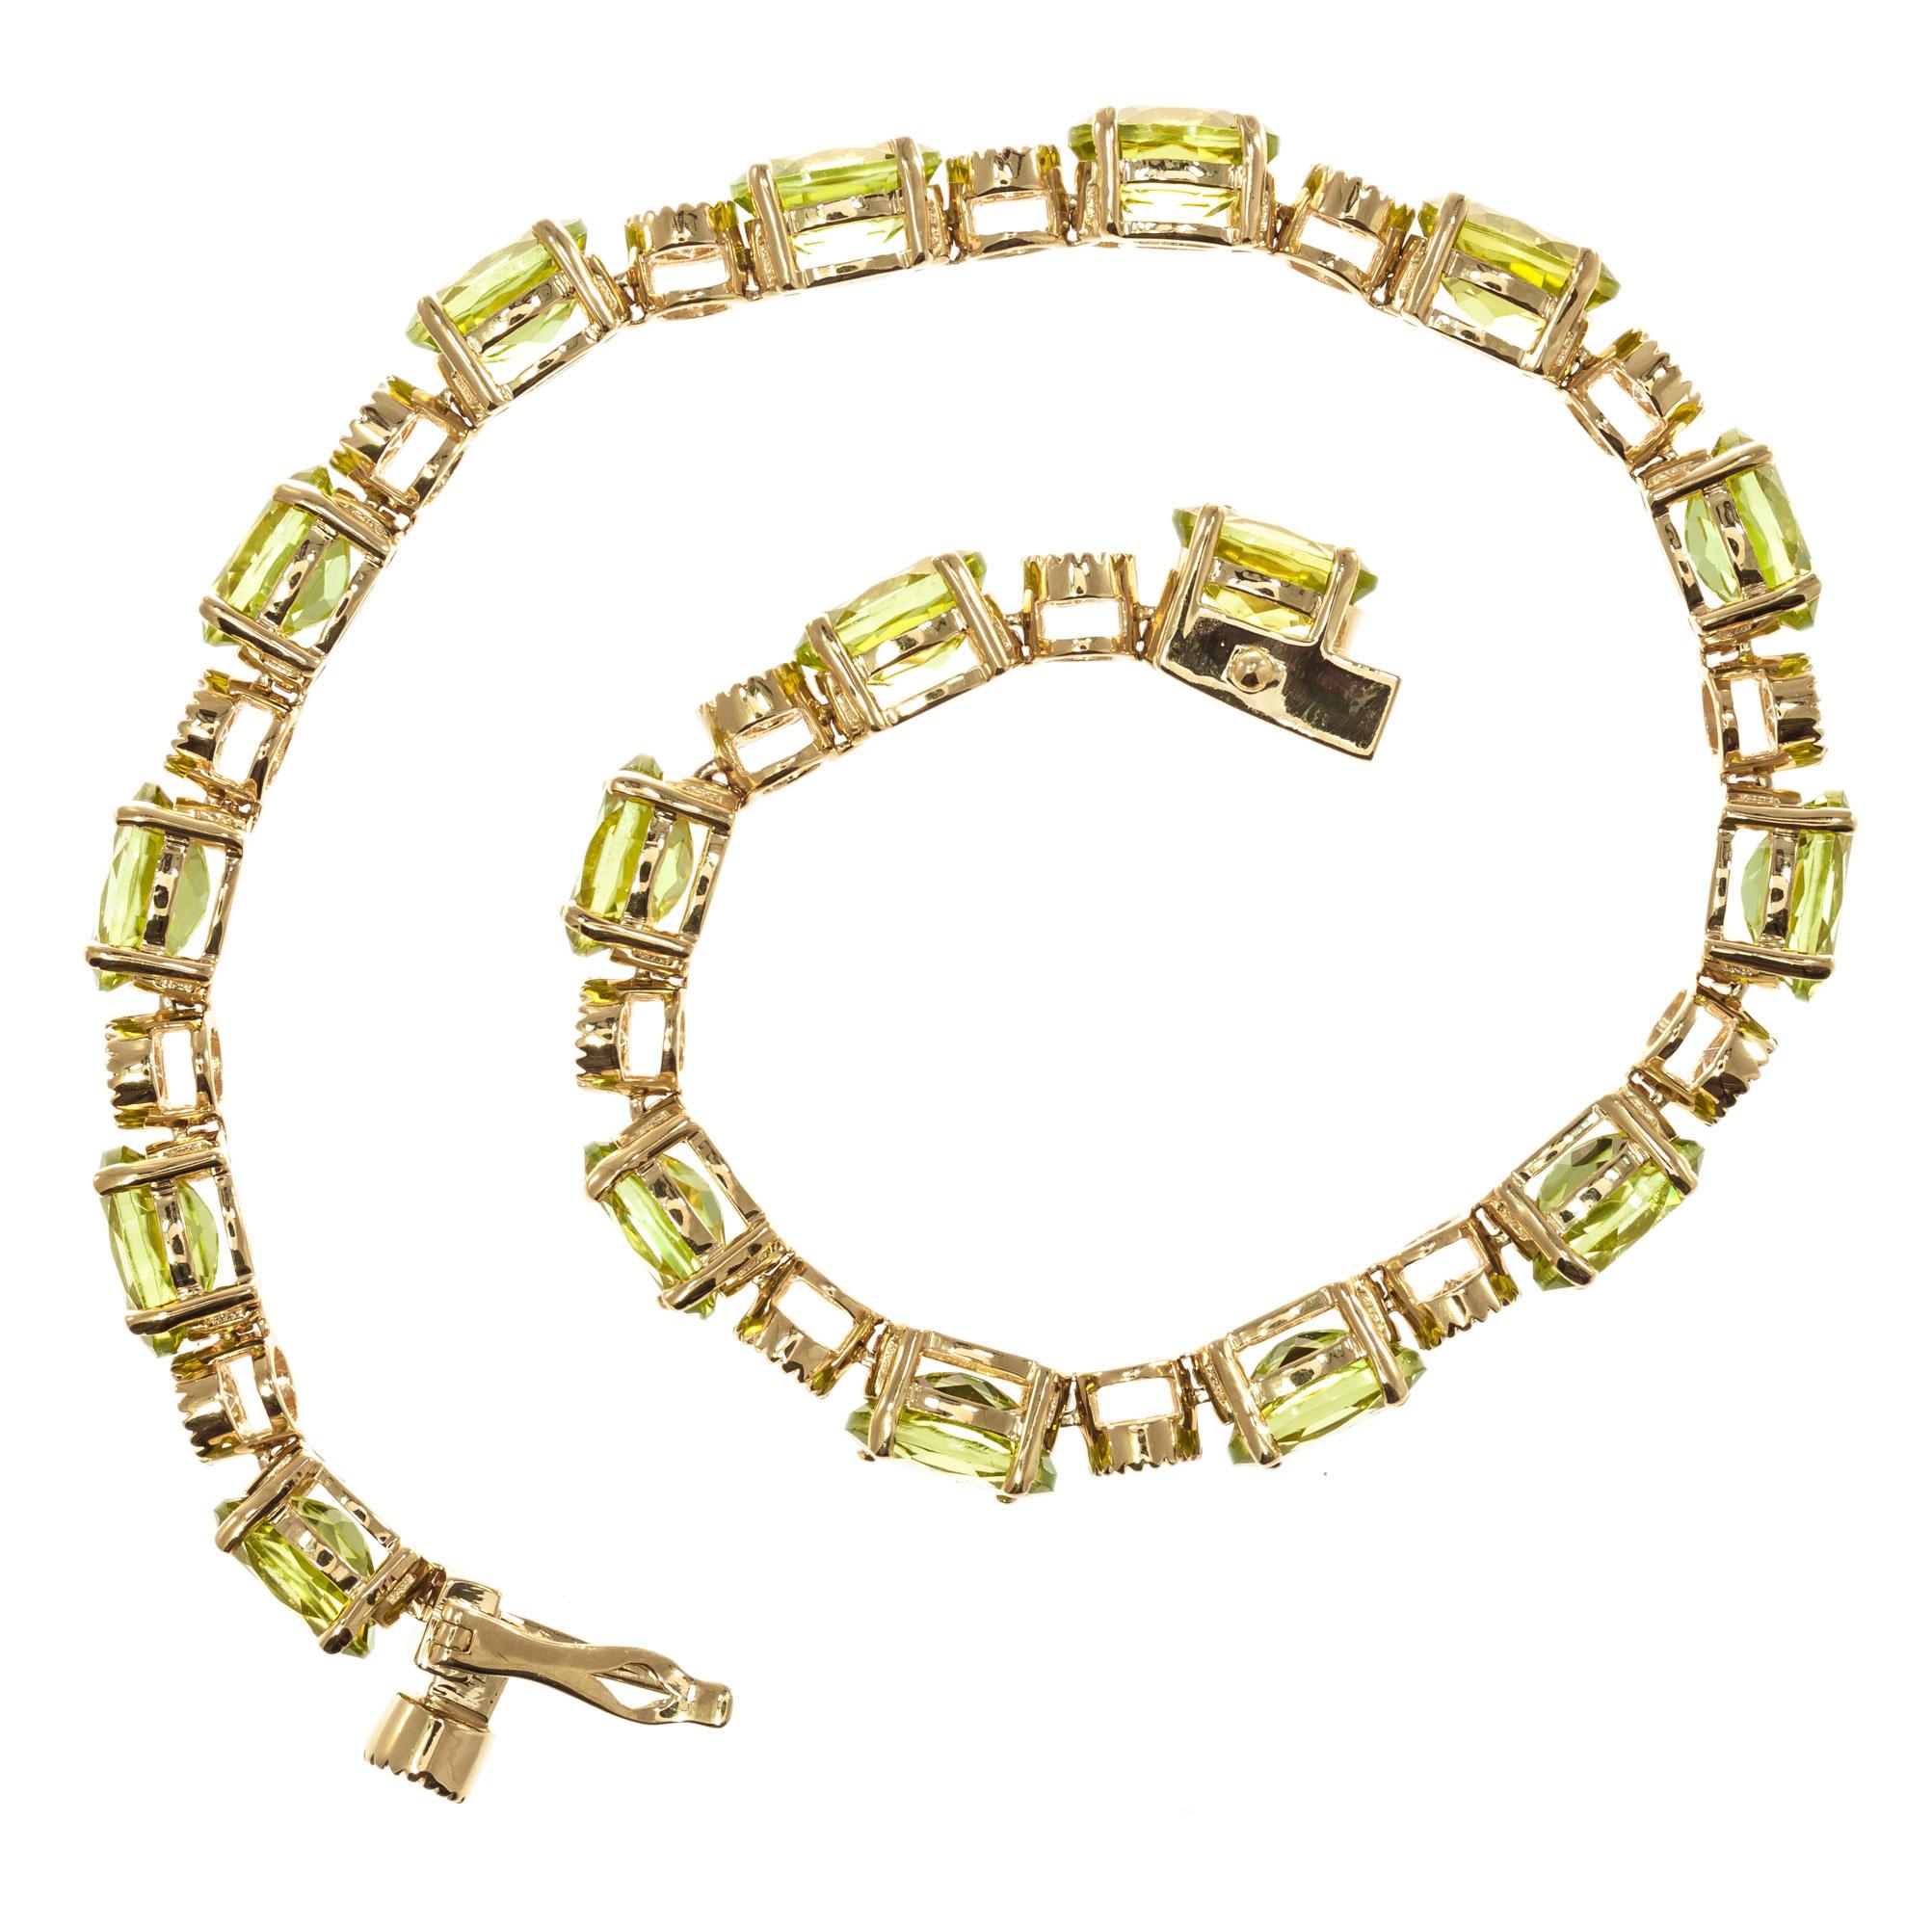 Peridot and diamond bracelet. Oval green peridot's separated by round bezel set diamonds. Set in 14k yellow gold. Built in box catch with figure eight safety 

17 oval bright green VS-SI peridots, Approximate 15.00 carats 
17 round brilliant cut H